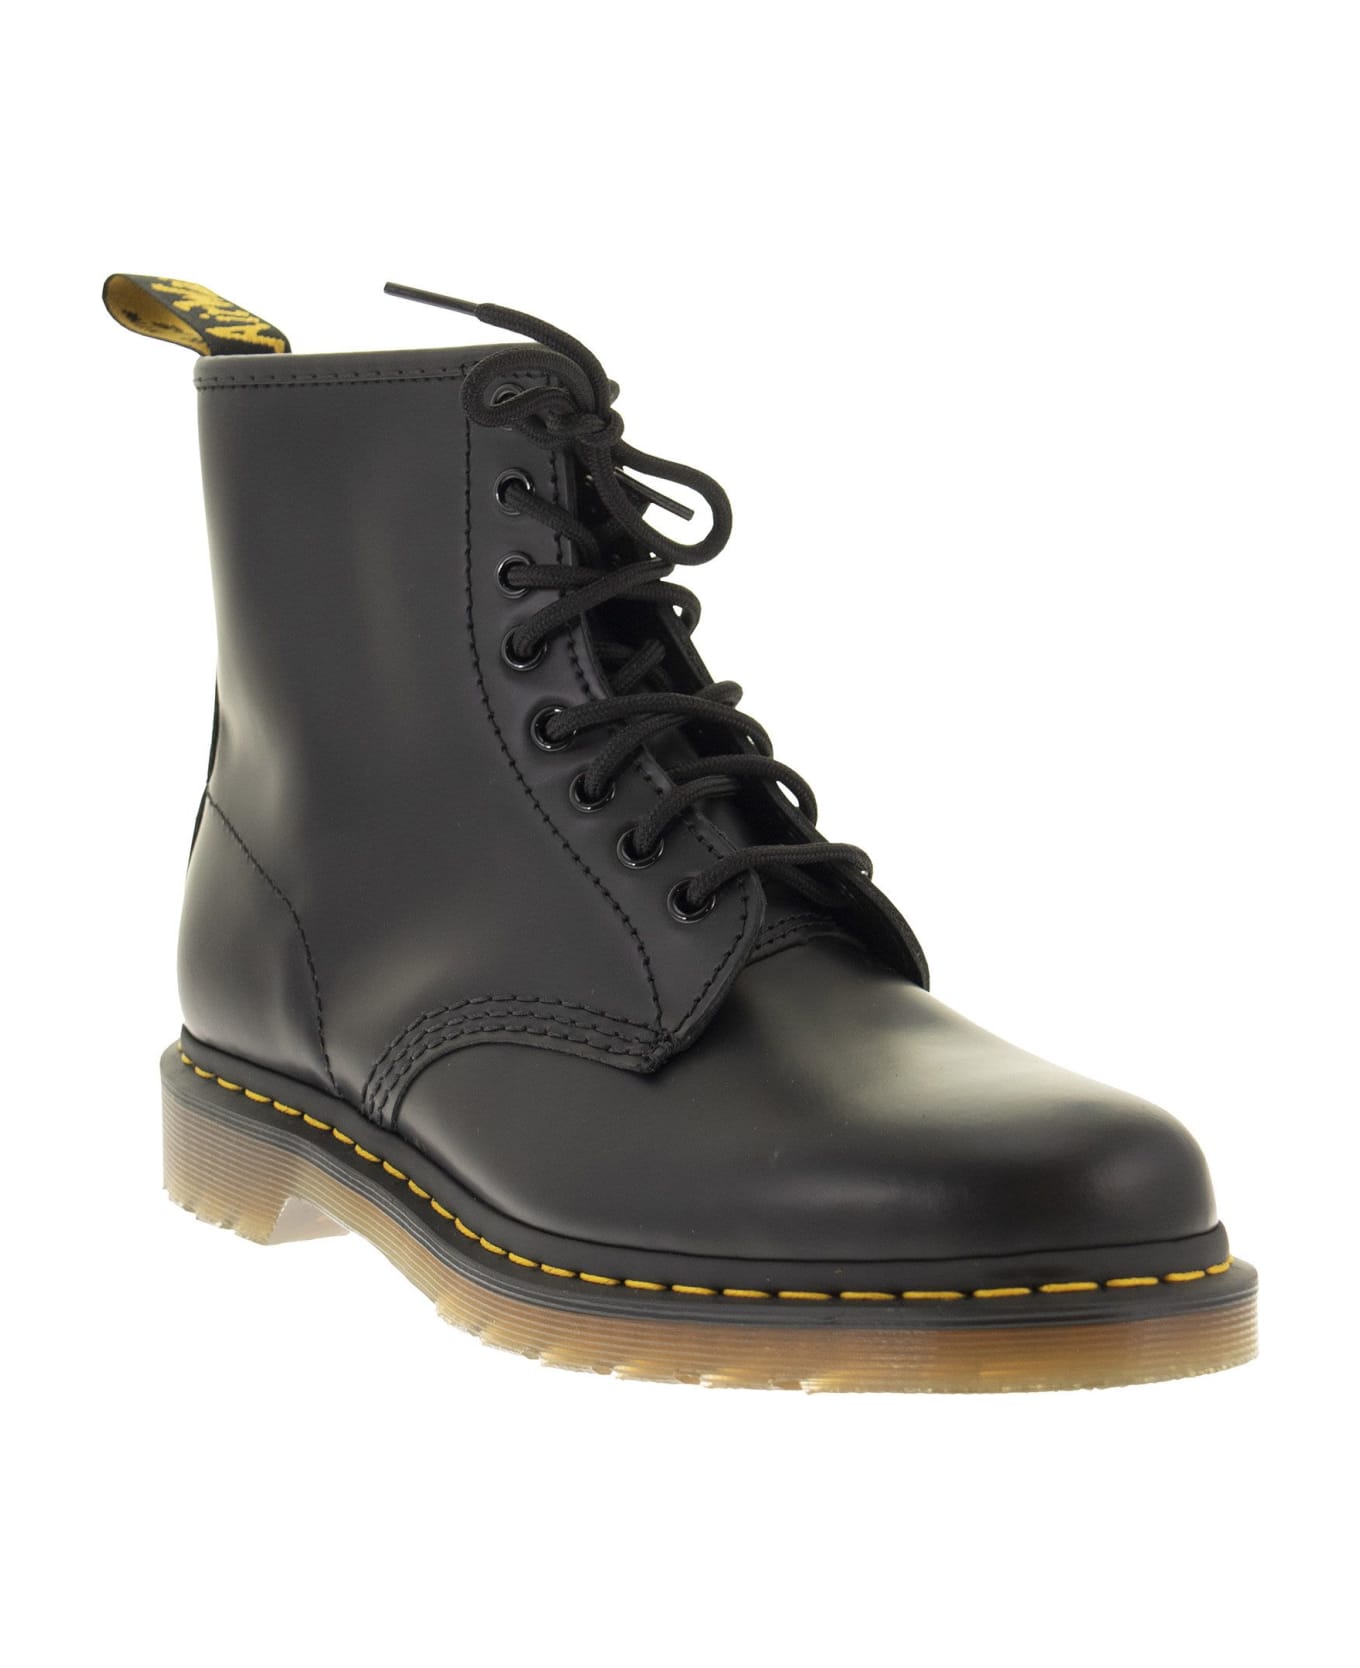 Dr. Martens 1460 Smooth Leather Combat Boots - Black ブーツ